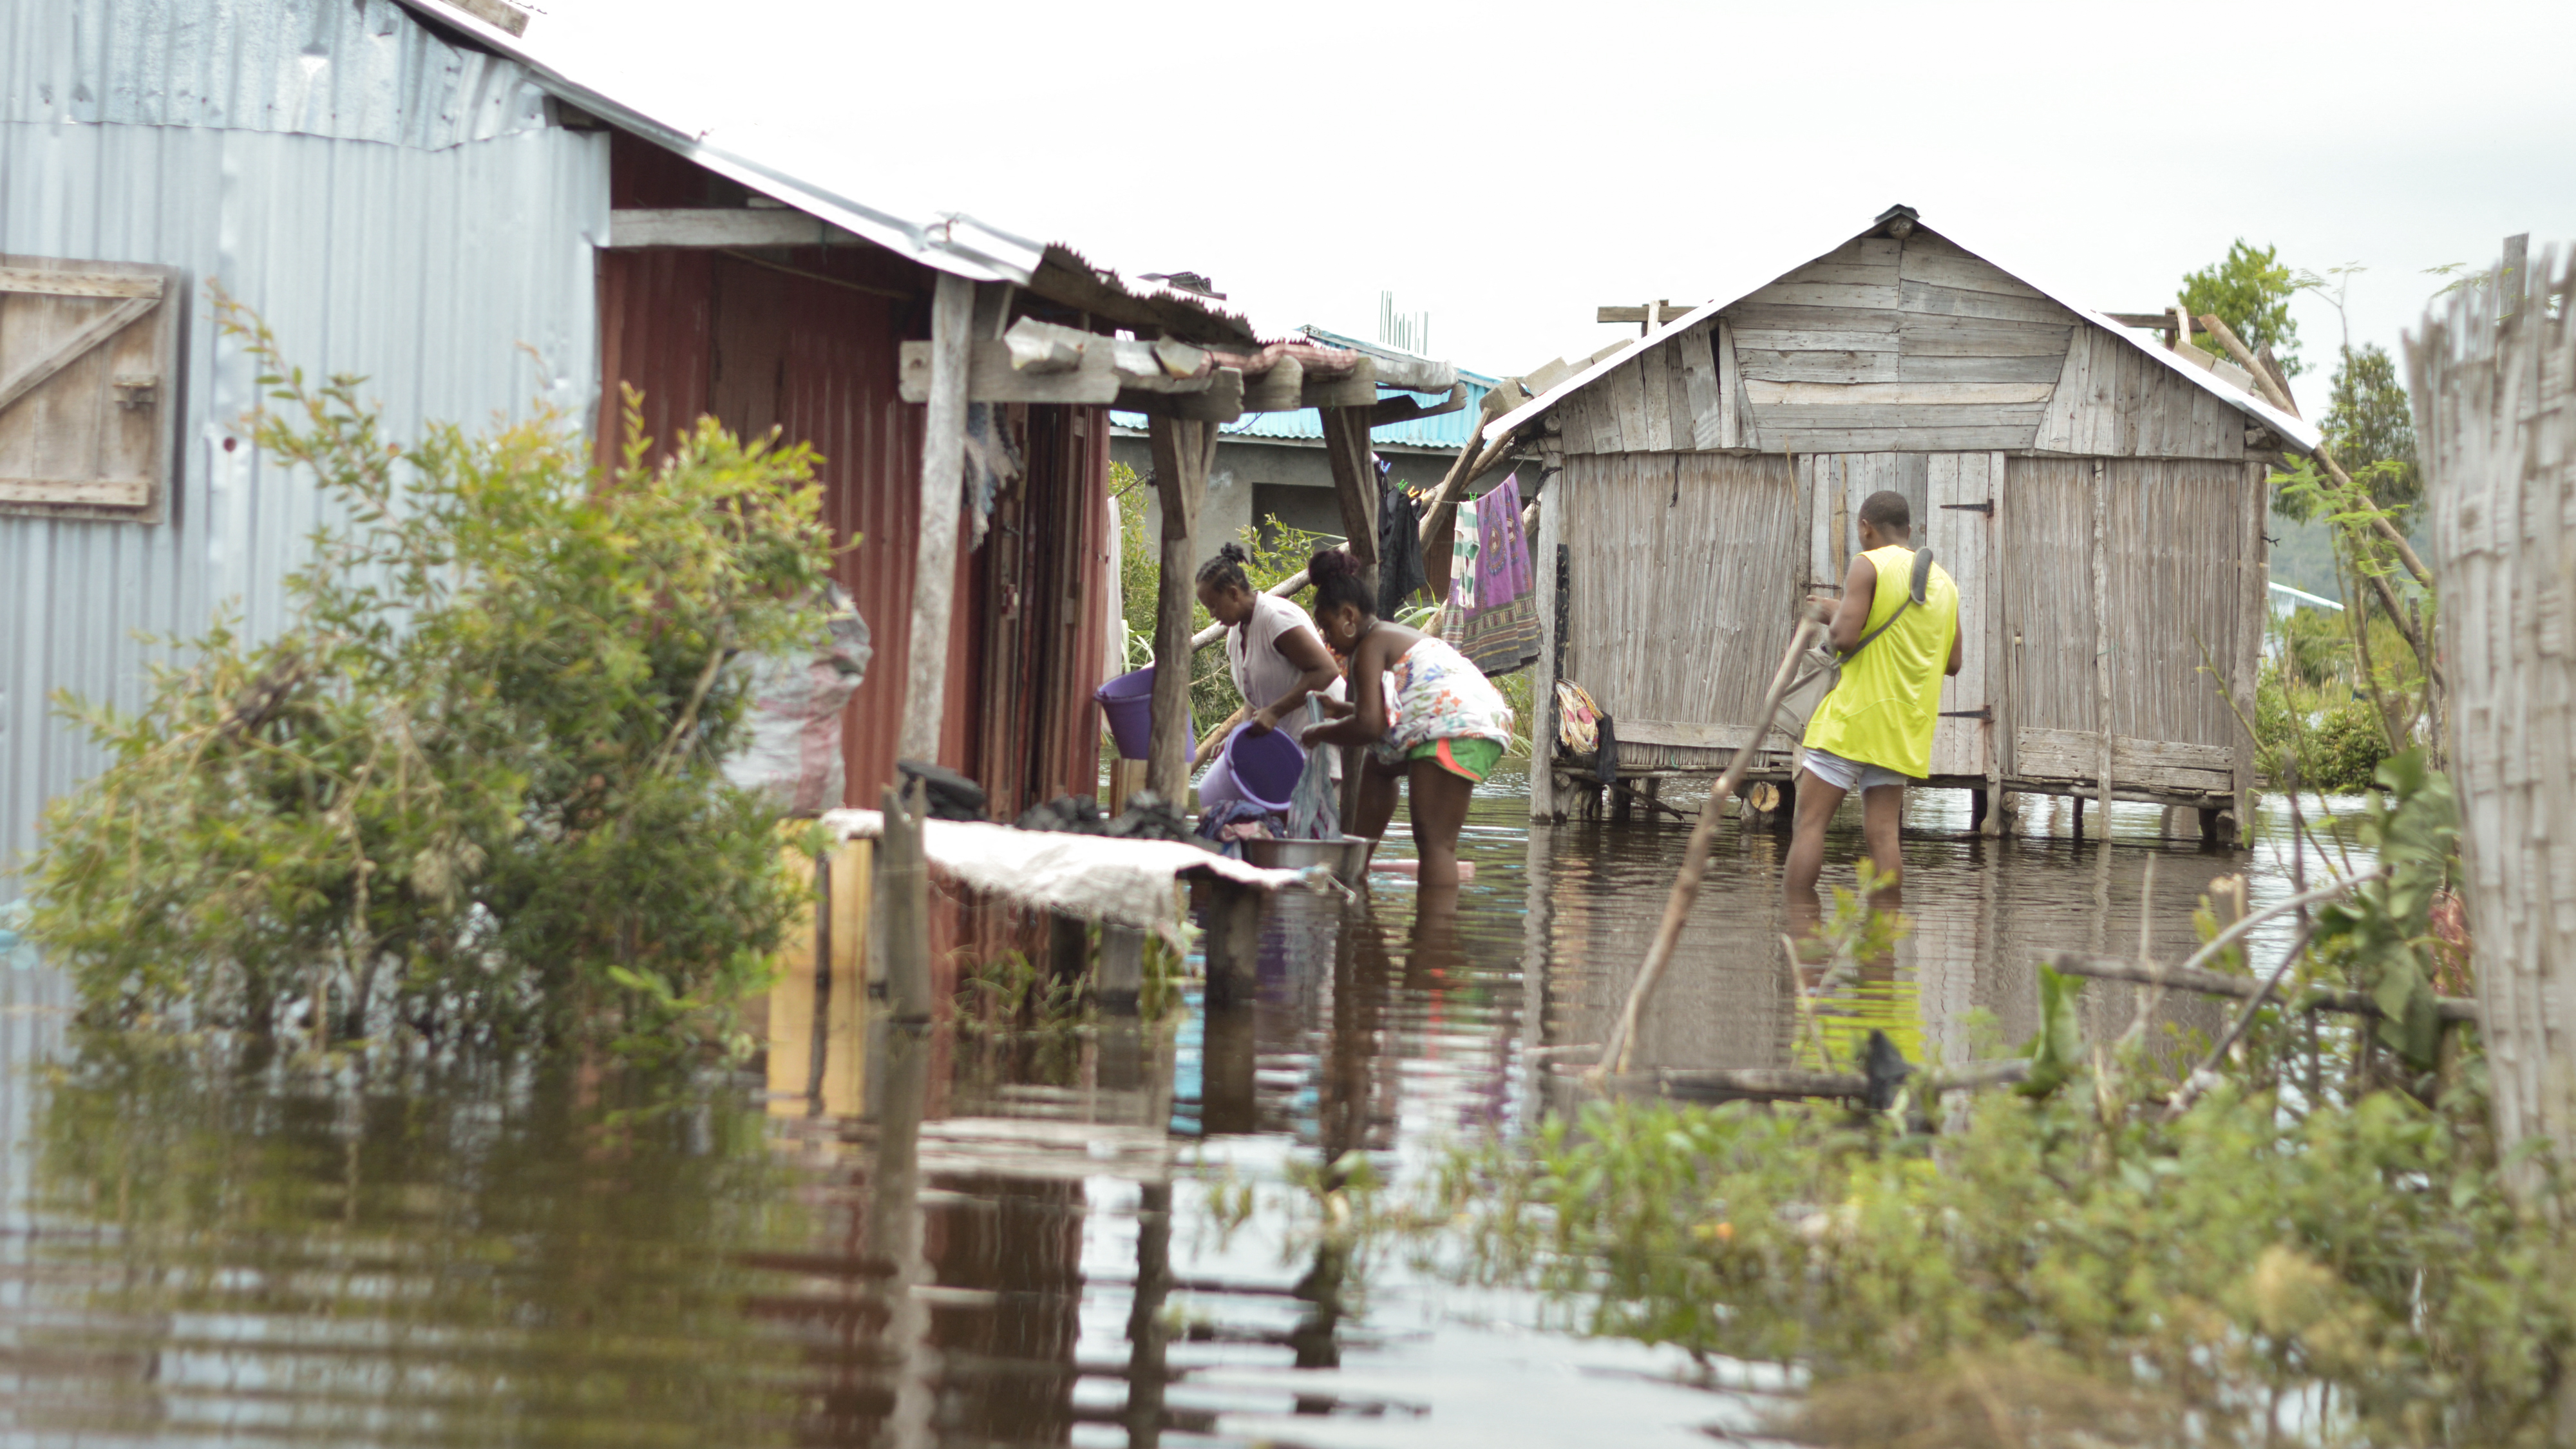 Residents of the Belle Souvenir neighborhood try to resume their daily life in their house submerged by water in Sambava on January 21, 2023, following the passage of cyclone Cheneso on January 19, 2023. / AFP